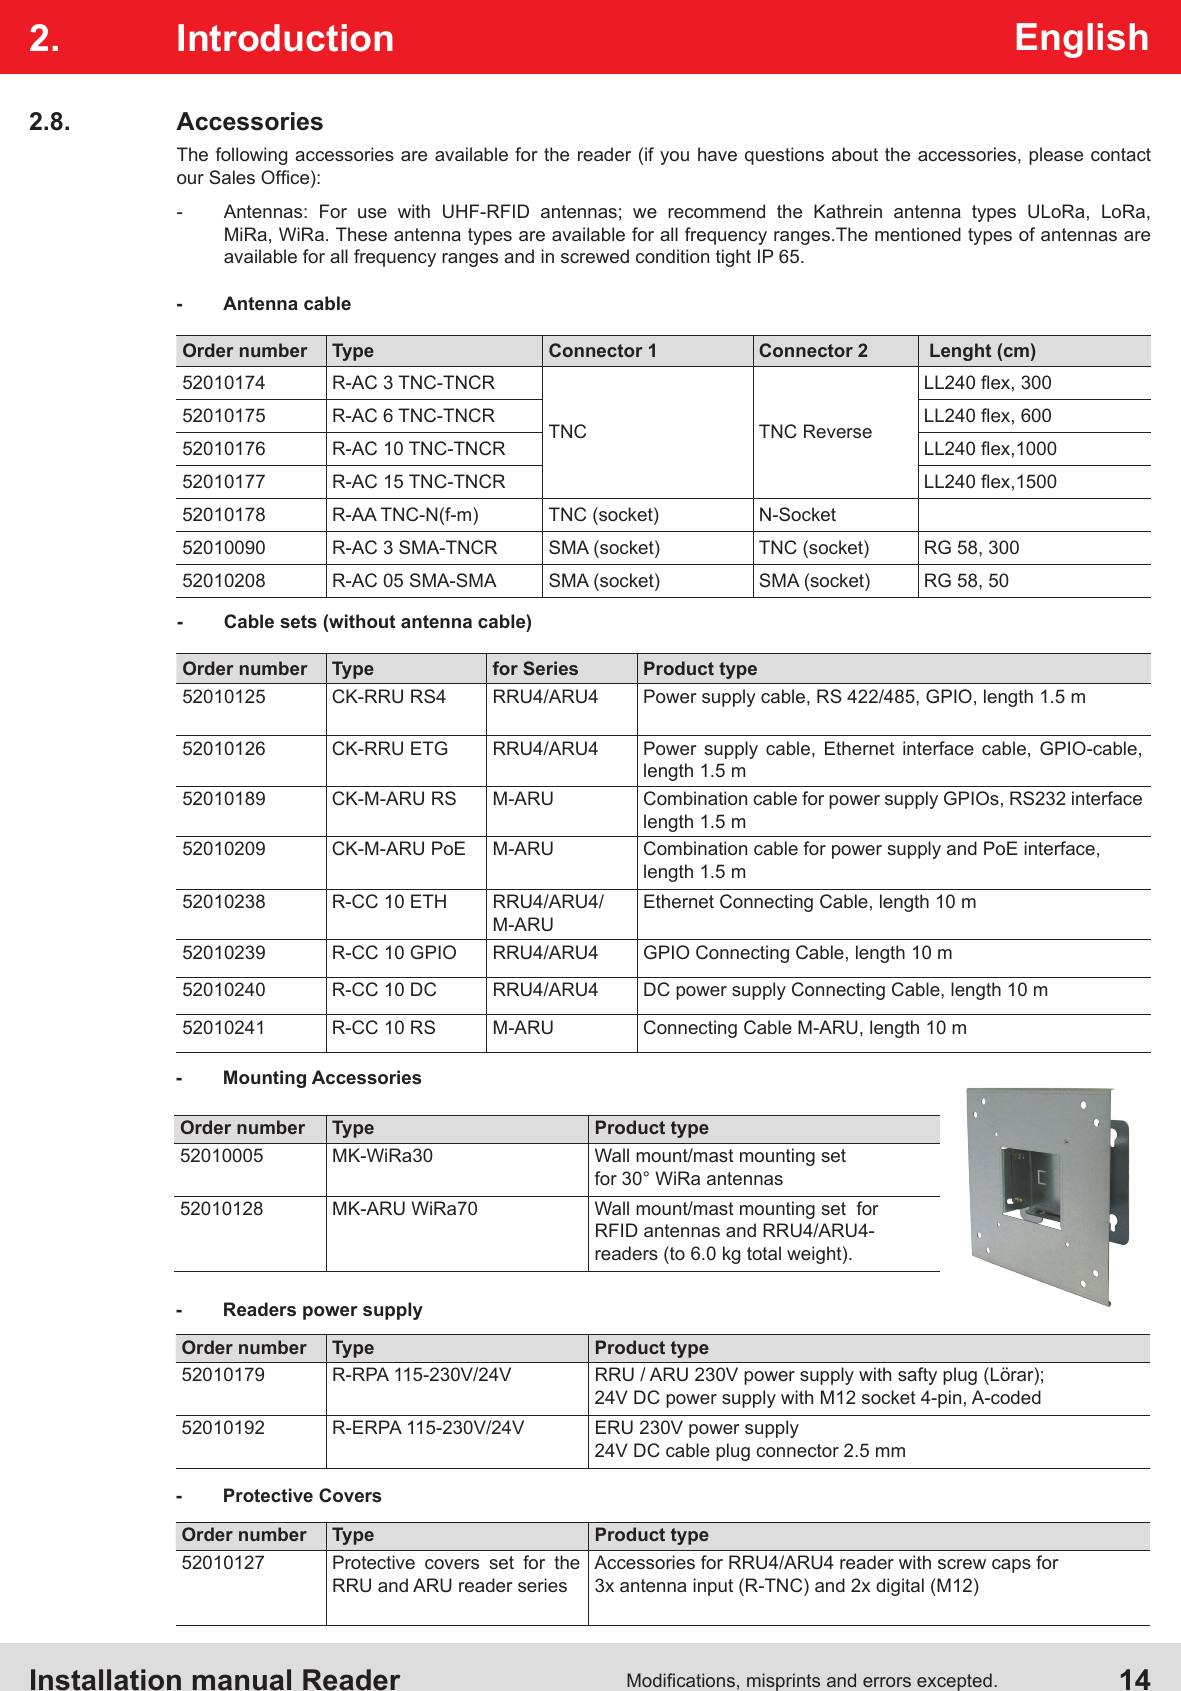 Installation manual Reader  14Modications, misprints and errors excepted.English2. Introduction-  Cable sets (without antenna cable)Order number Type for Series Product type52010125 CK-RRU RS4 RRU4/ARU4 Power supply cable, RS 422/485, GPIO, length 1.5 m52010126 CK-RRU ETG RRU4/ARU4 Power supply cable, Ethernet interface cable, GPIO-cable, length 1.5 m52010189 CK-M-ARU RS M-ARU Combination cable for power supply GPIOs, RS232 interfacelength 1.5 m52010209 CK-M-ARU PoE M-ARU Combination cable for power supply and PoE interface, length 1.5 m52010238 R-CC 10 ETH RRU4/ARU4/M-ARUEthernet Connecting Cable, length 10 m52010239 R-CC 10 GPIO RRU4/ARU4 GPIO Connecting Cable, length 10 m52010240 R-CC 10 DC RRU4/ARU4 DC power supply Connecting Cable, length 10 m52010241 R-CC 10 RS M-ARU Connecting Cable M-ARU, length 10 m2.8. AccessoriesThe following accessories are available for the reader (if you have questions about the accessories, please contact  our Sales Ofce):-  Antennas: For use with UHF-RFID antennas; we recommend the Kathrein antenna types ULoRa, LoRa,  MiRa, WiRa. These antenna types are available for all frequency ranges.The mentioned types of antennas are available for all frequency ranges and in screwed condition tight IP 65.Order number Type Connector 1 Connector 2  Lenght (cm)52010174 R-AC 3 TNC-TNCRTNC TNC ReverseLL240 ex, 30052010175 R-AC 6 TNC-TNCR LL240 ex, 60052010176 R-AC 10 TNC-TNCR LL240 ex,100052010177 R-AC 15 TNC-TNCR LL240 ex,150052010178 R-AA TNC-N(f-m) TNC (socket) N-Socket52010090 R-AC 3 SMA-TNCR SMA (socket) TNC (socket) RG 58, 30052010208 R-AC 05 SMA-SMA SMA (socket) SMA (socket) RG 58, 50Order number Type Product type52010005 MK-WiRa30 Wall mount/mast mounting set for 30° WiRa antennas52010128 MK-ARU WiRa70 Wall mount/mast mounting set  for RFID antennas and RRU4/ARU4-readers (to 6.0 kg total weight).-  Mounting Accessories-  Protective CoversOrder number Type Product type52010179 R-RPA 115-230V/24V RRU / ARU 230V power supply with safty plug (Lörar); 24V DC power supply with M12 socket 4-pin, A-coded52010192 R-ERPA 115-230V/24V ERU 230V power supply 24V DC cable plug connector 2.5 mmOrder number Type Product type52010127 Protective covers set for the RRU and ARU reader seriesAccessories for RRU4/ARU4 reader with screw caps for 3x antenna input (R-TNC) and 2x digital (M12)-  Readers power supply -  Antenna cable